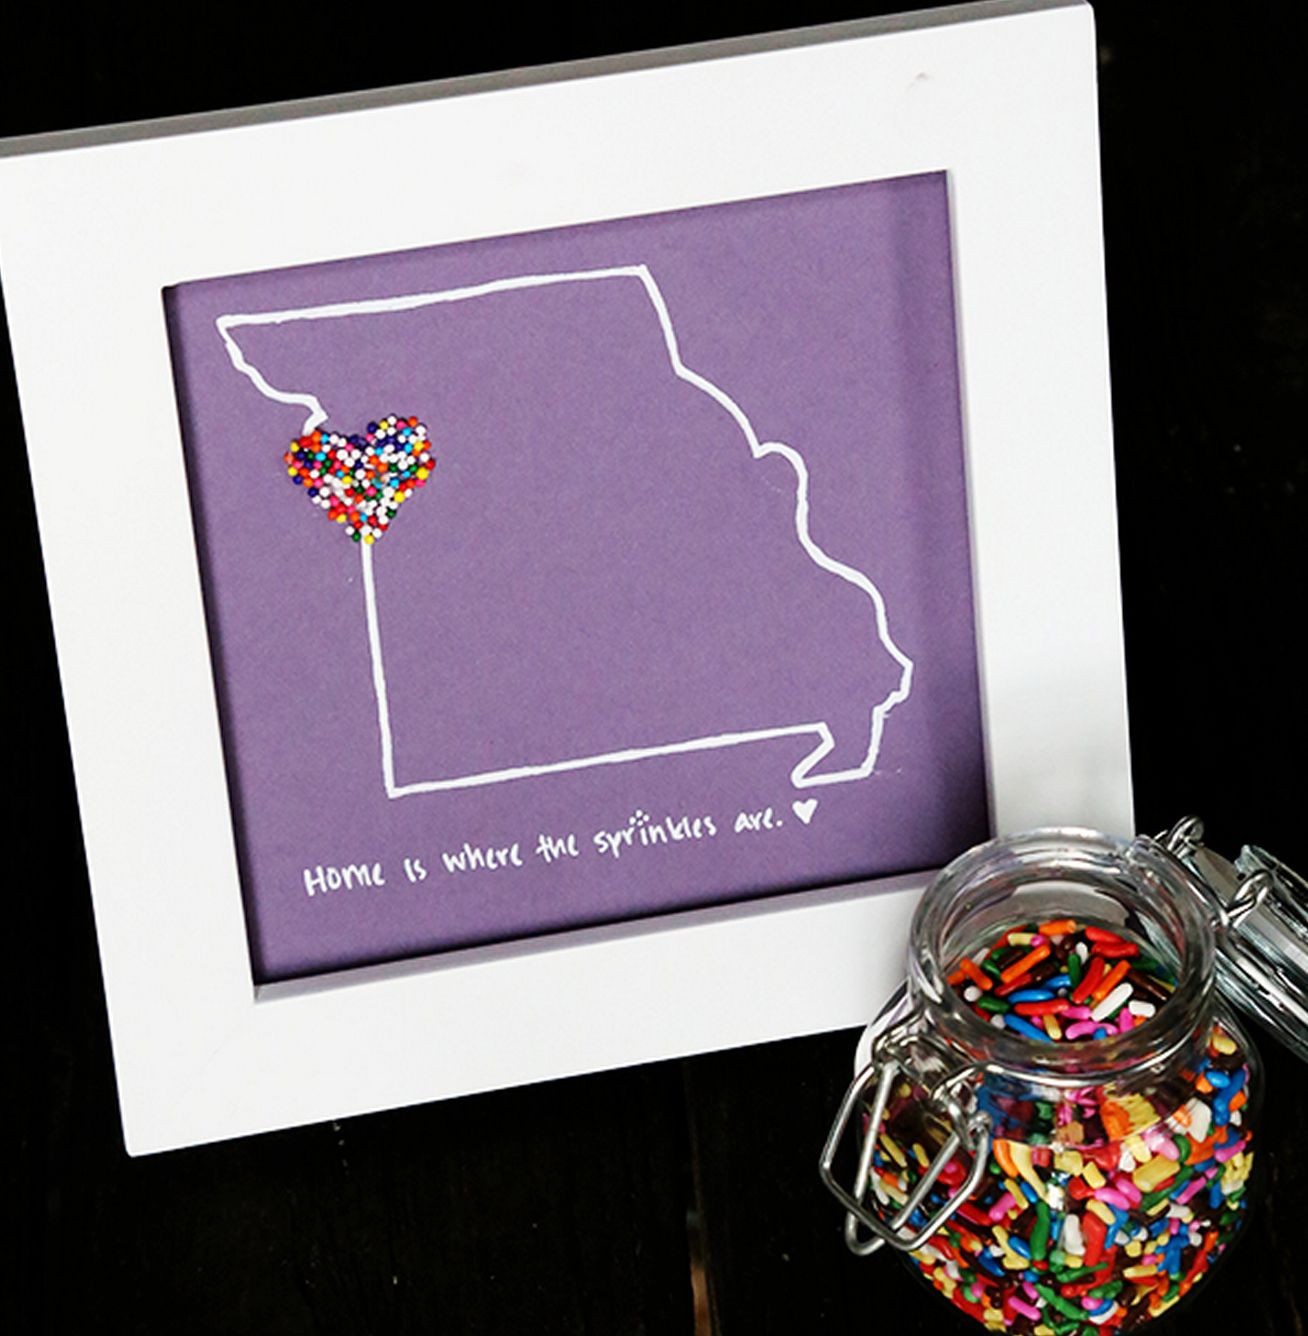 Graduation Gift Ideas For Best Friend
 DIY Sprinkles Art Top 5 DIY Presents To Make For a